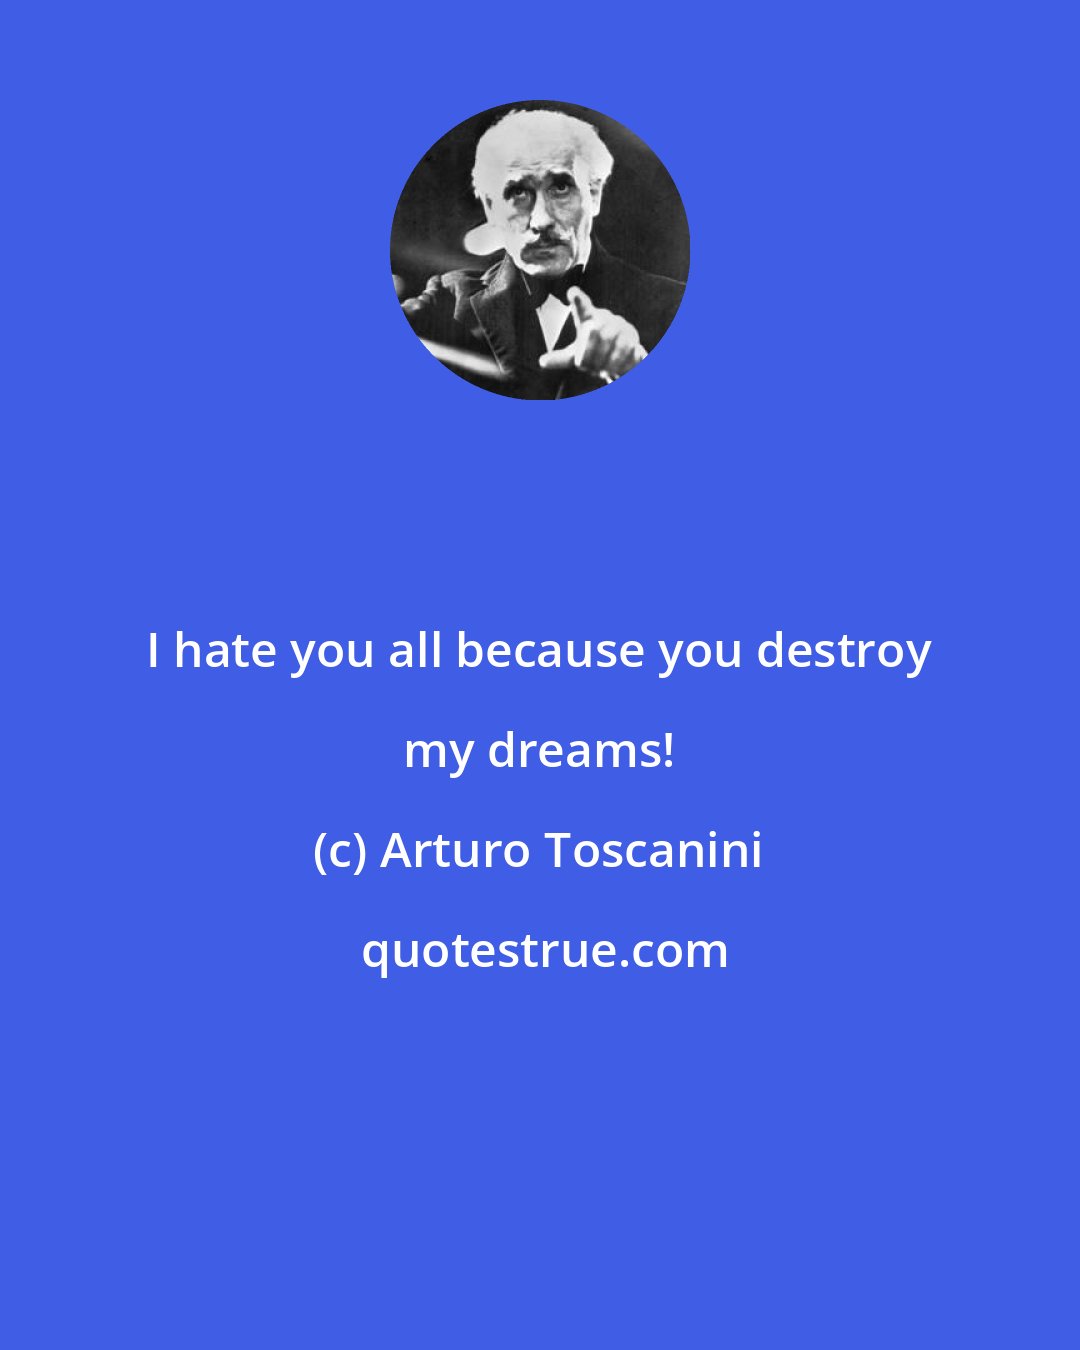 Arturo Toscanini: I hate you all because you destroy my dreams!